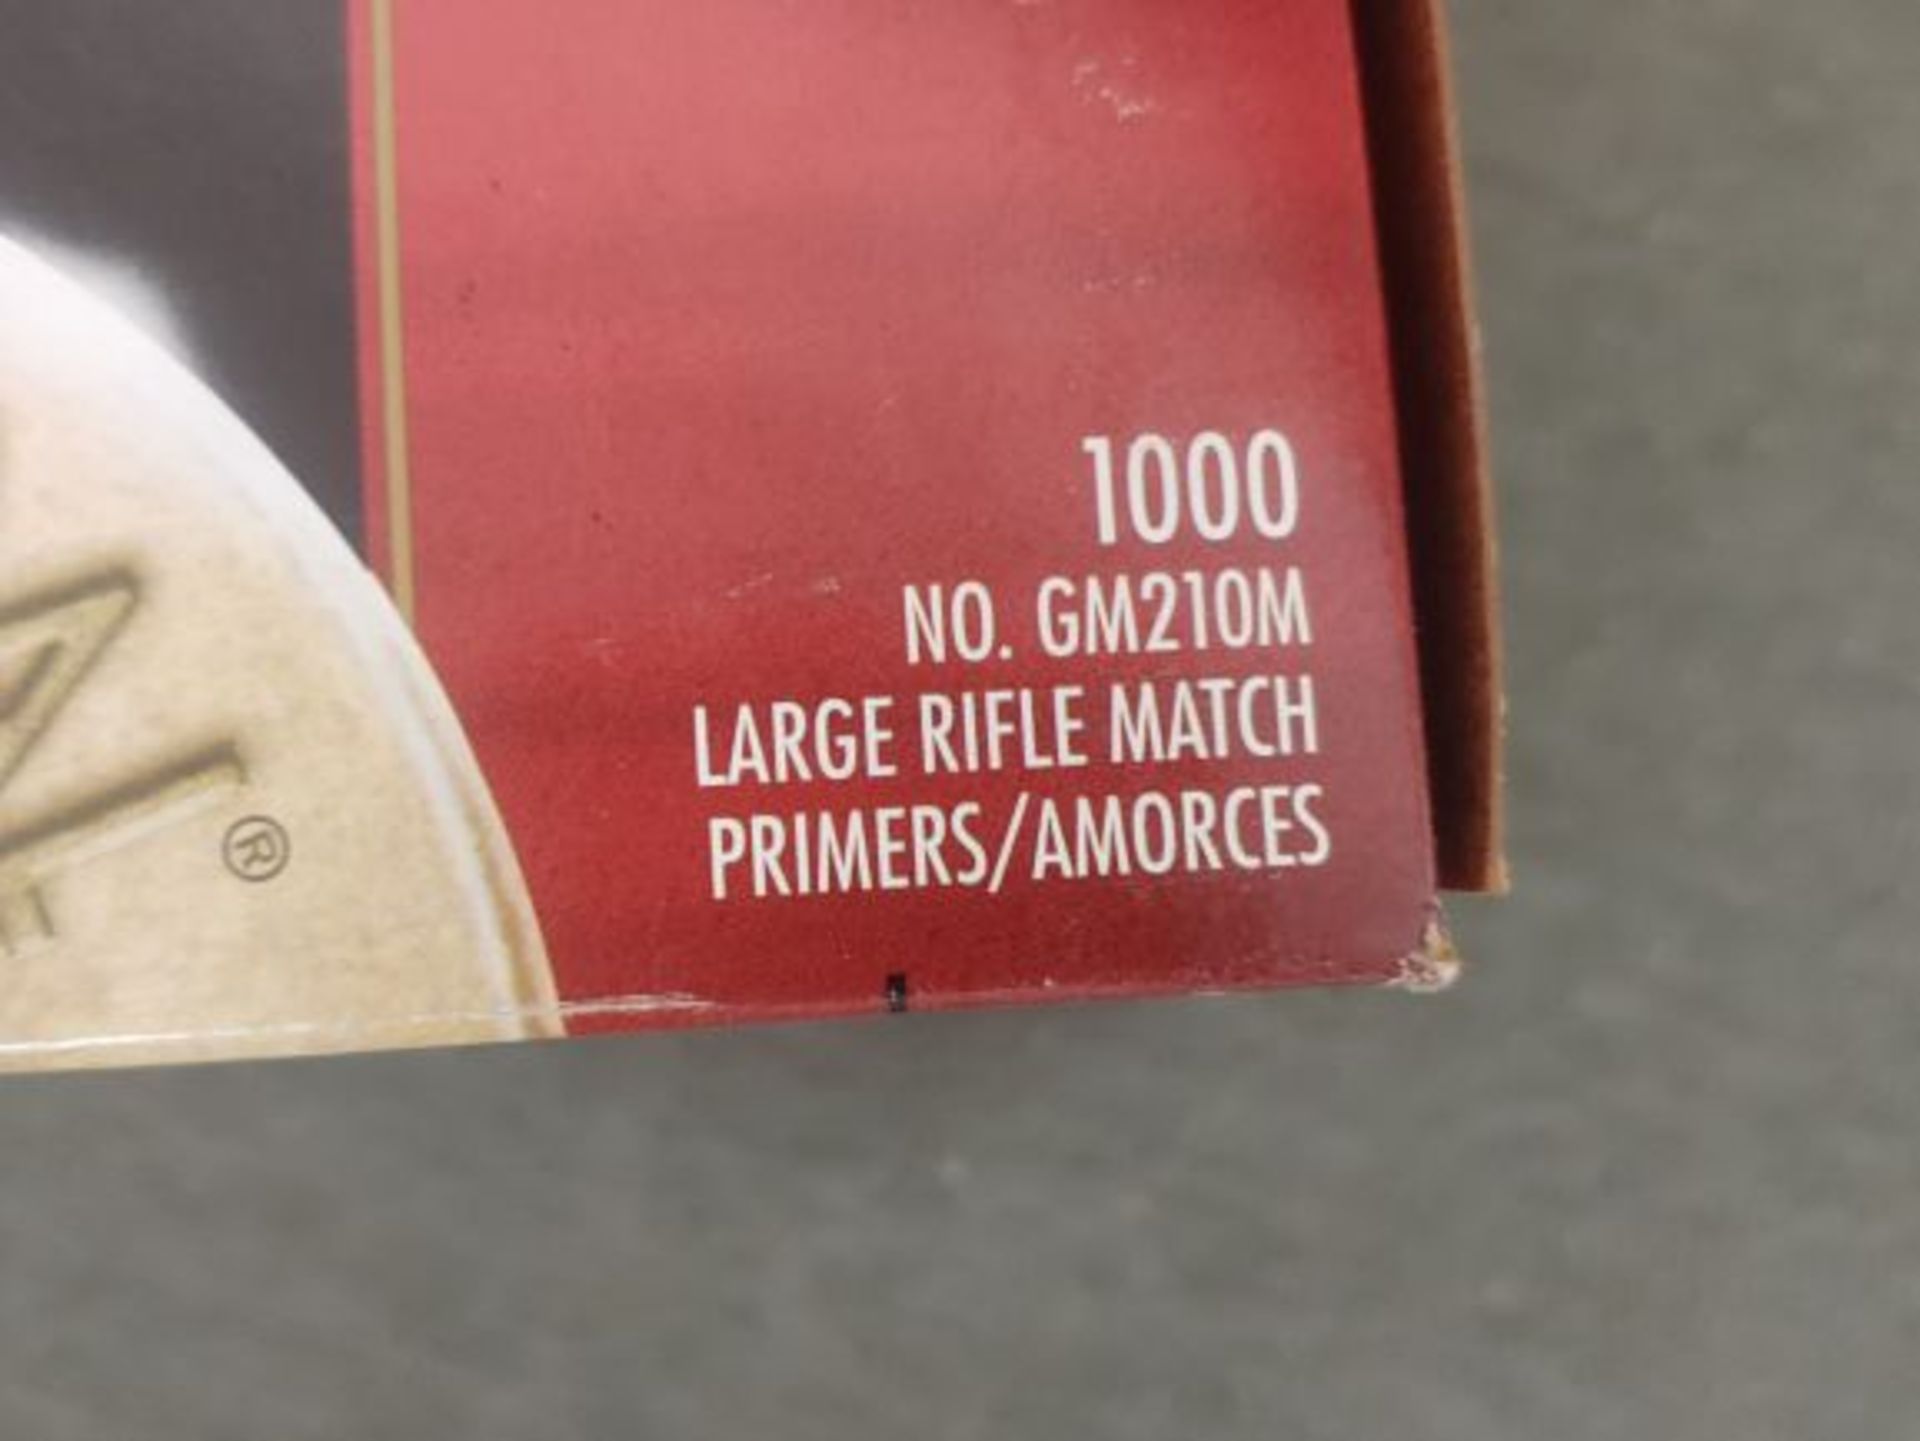 635. Fed Premium Large Rifle Match Primers, Box of 1000 (1x the Money) - Image 3 of 3